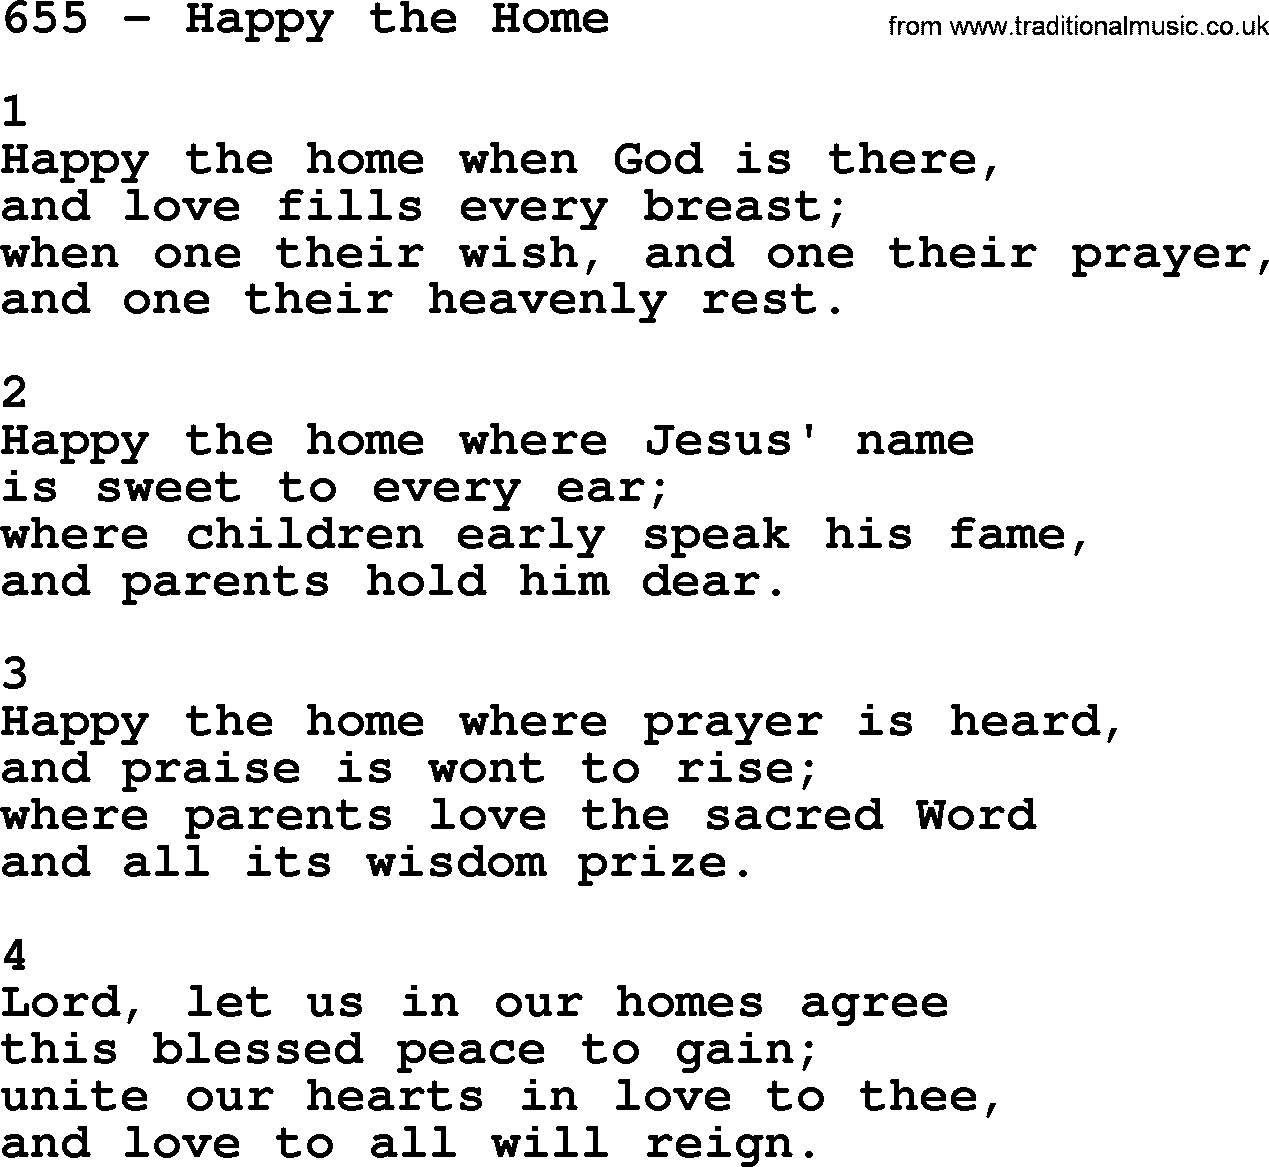 Complete Adventis Hymnal, title: 655-Happy The Home, with lyrics, midi, mp3, powerpoints(PPT) and PDF,